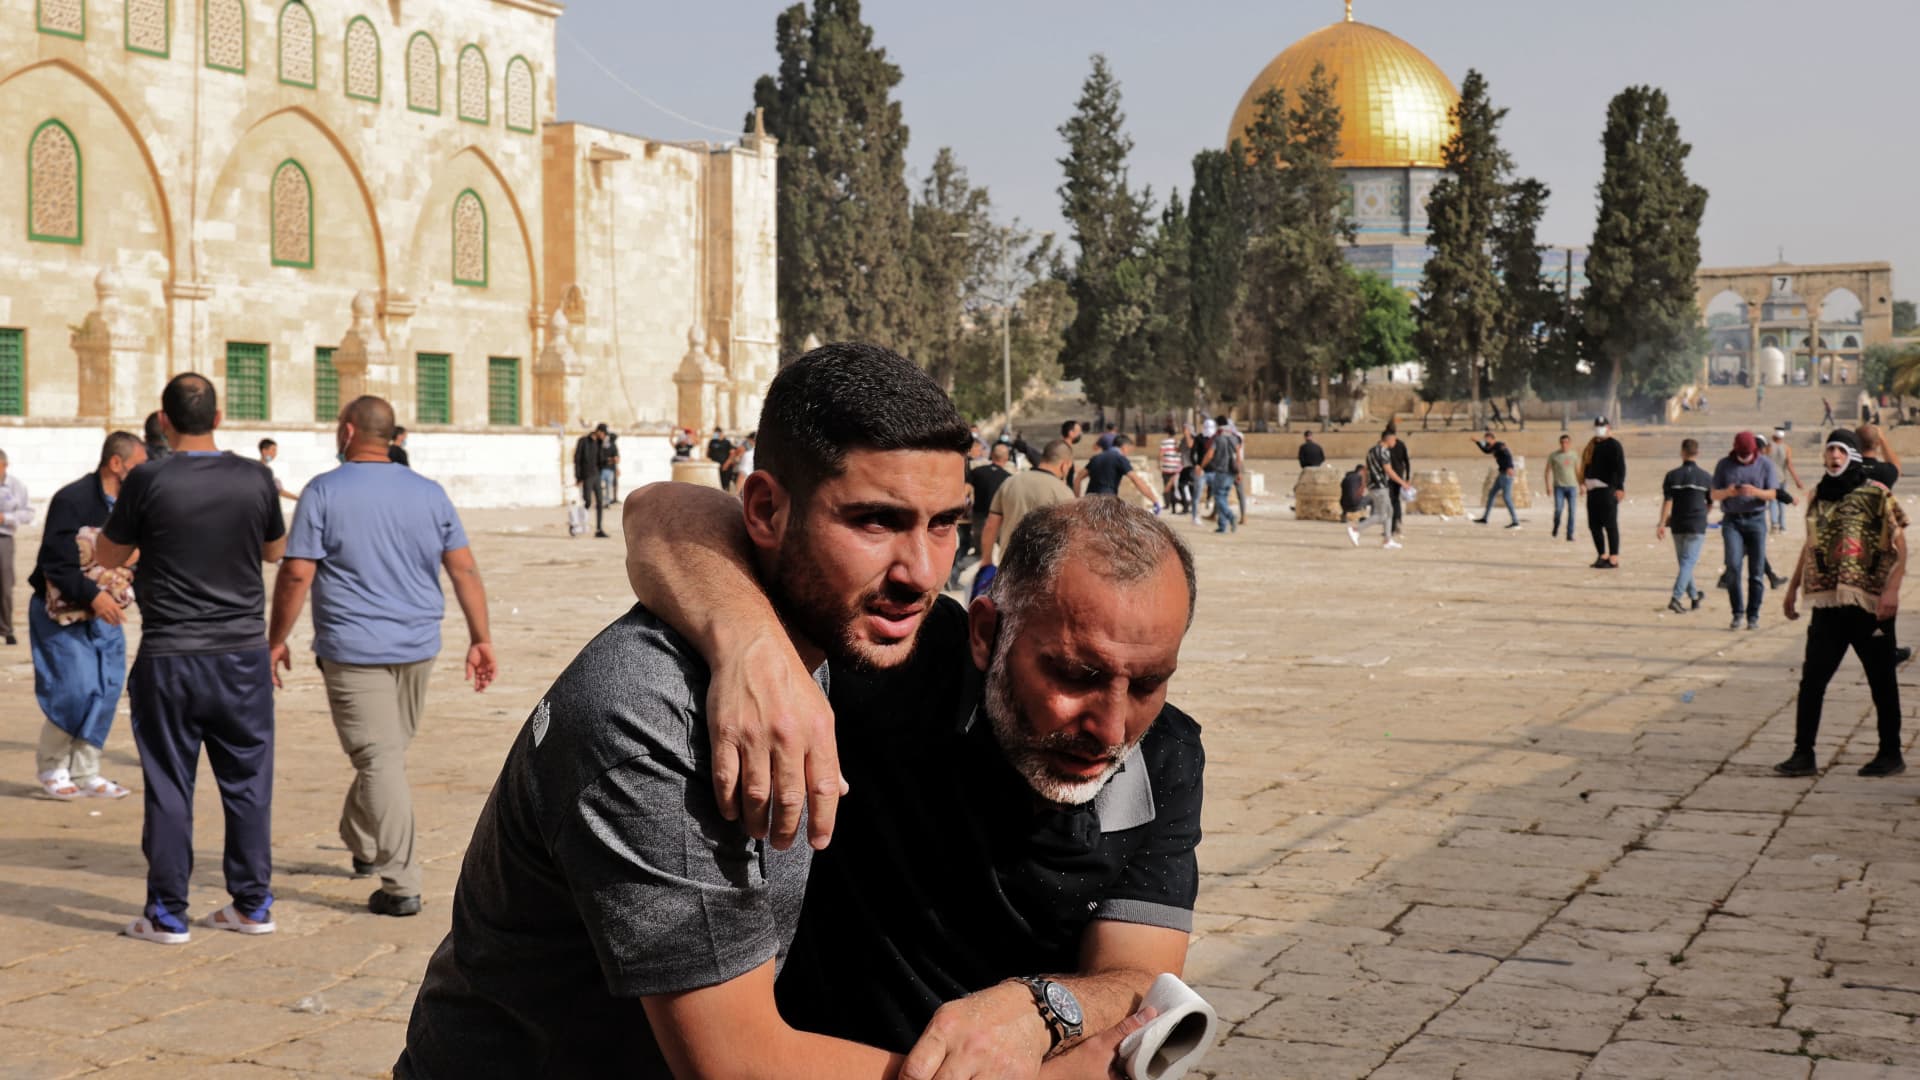 A Palestinian man helps a wounded fellow protester amid clashes with Israeli security forces at Jerusalem's Al-Aqsa mosque compound on May 10, 2021, ahead of a planned march to commemorate Israel's takeover of Jerusalem in the 1967 Six-Day War.